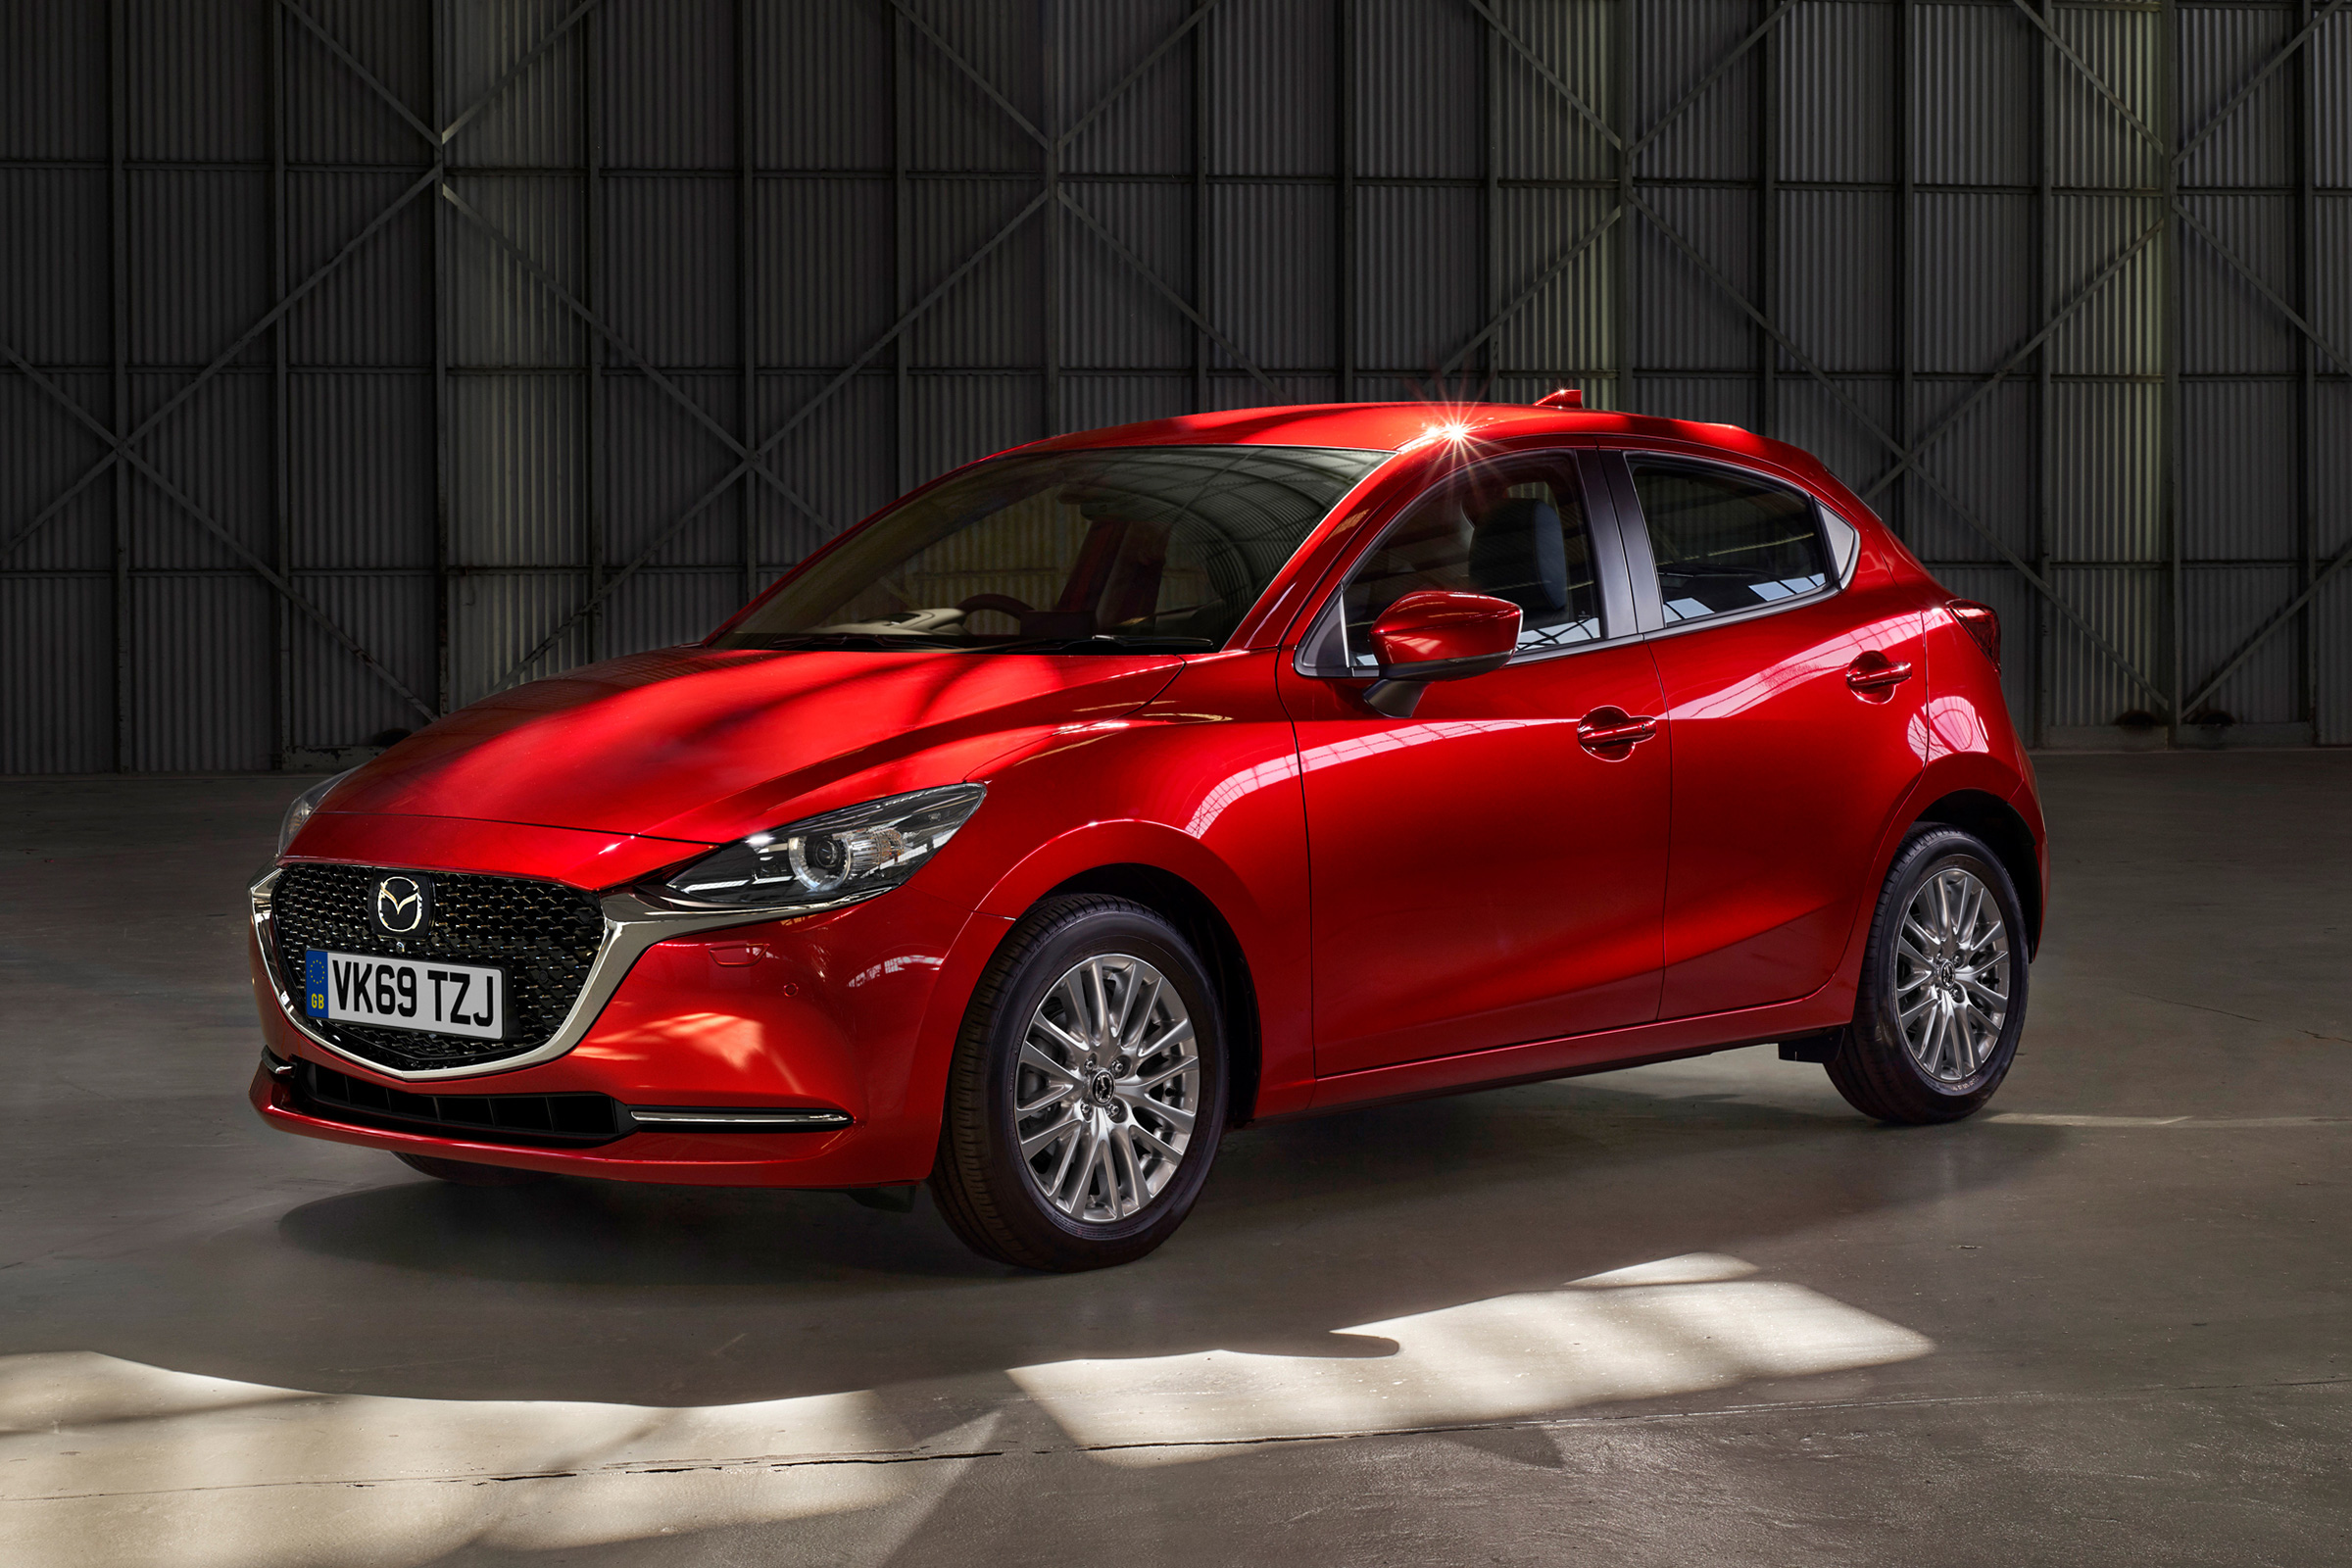 New 2020 Mazda 2 UK prices and specs revealed Auto Express